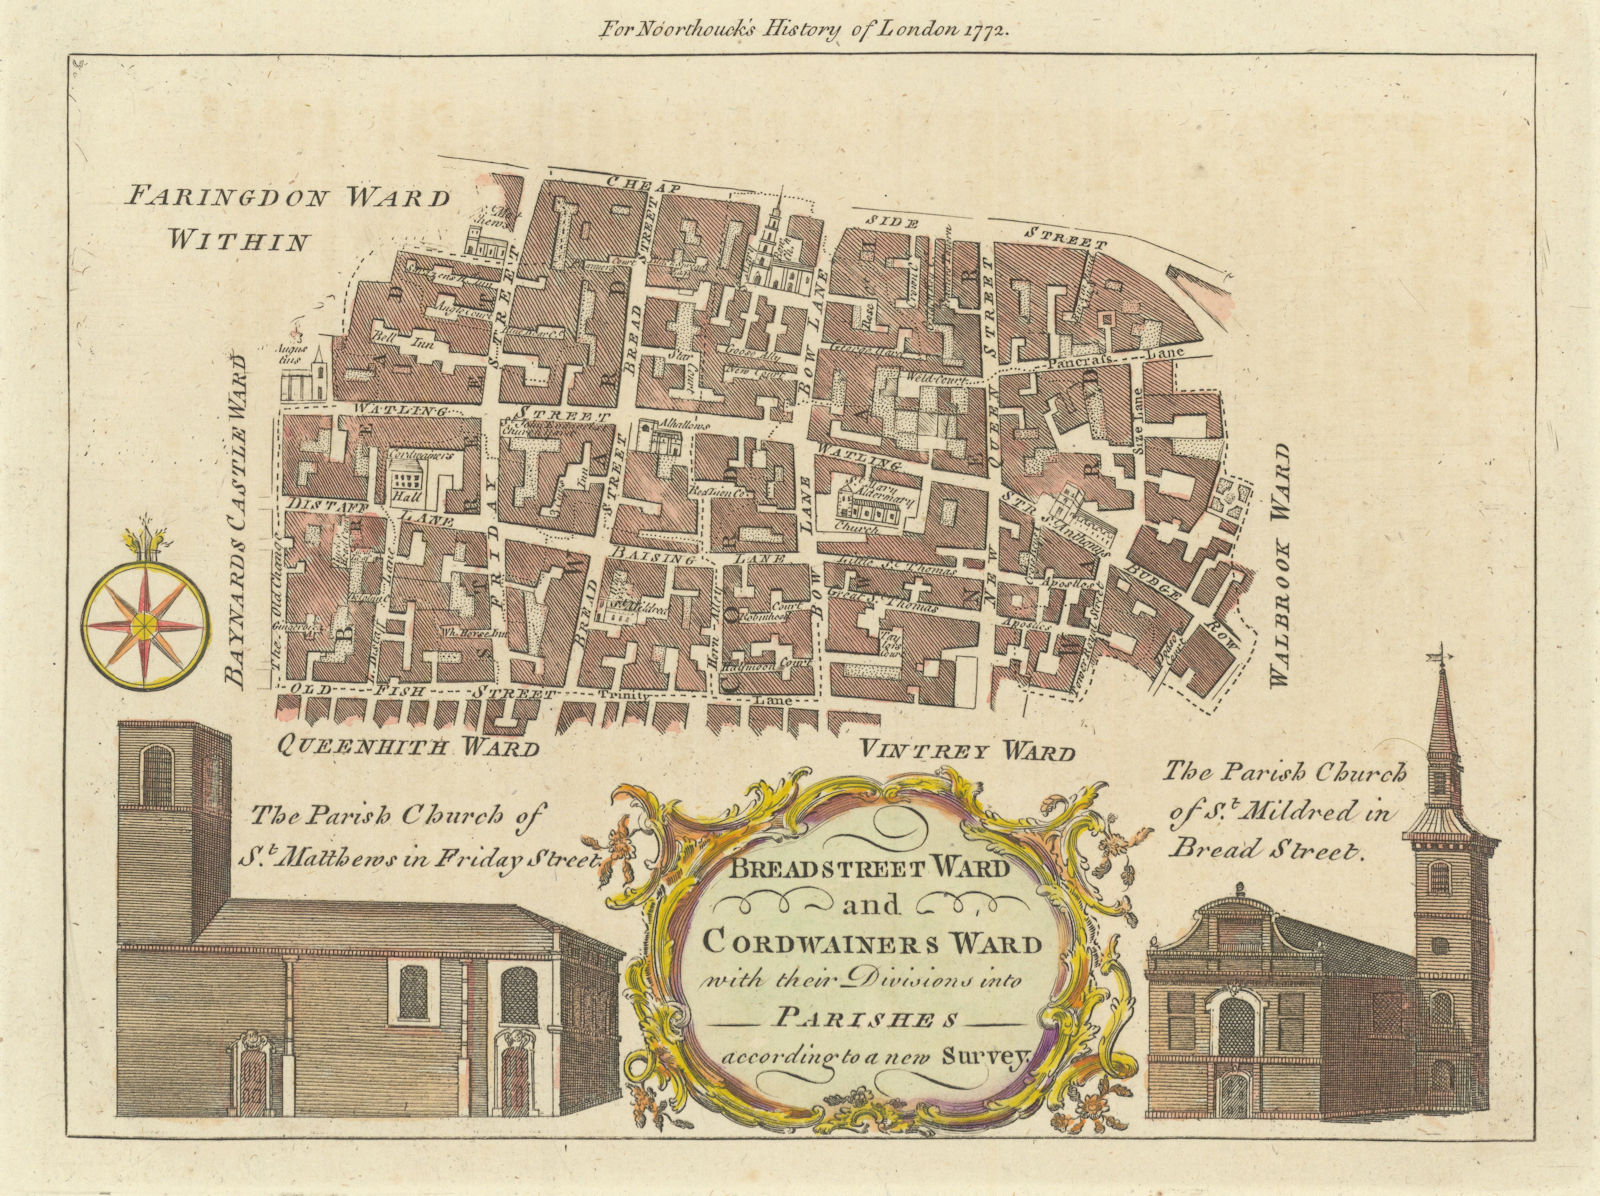 Associate Product Breadstreet & Cordwainers Wards. City of London. Cheapside. BOWEN 1772 old map